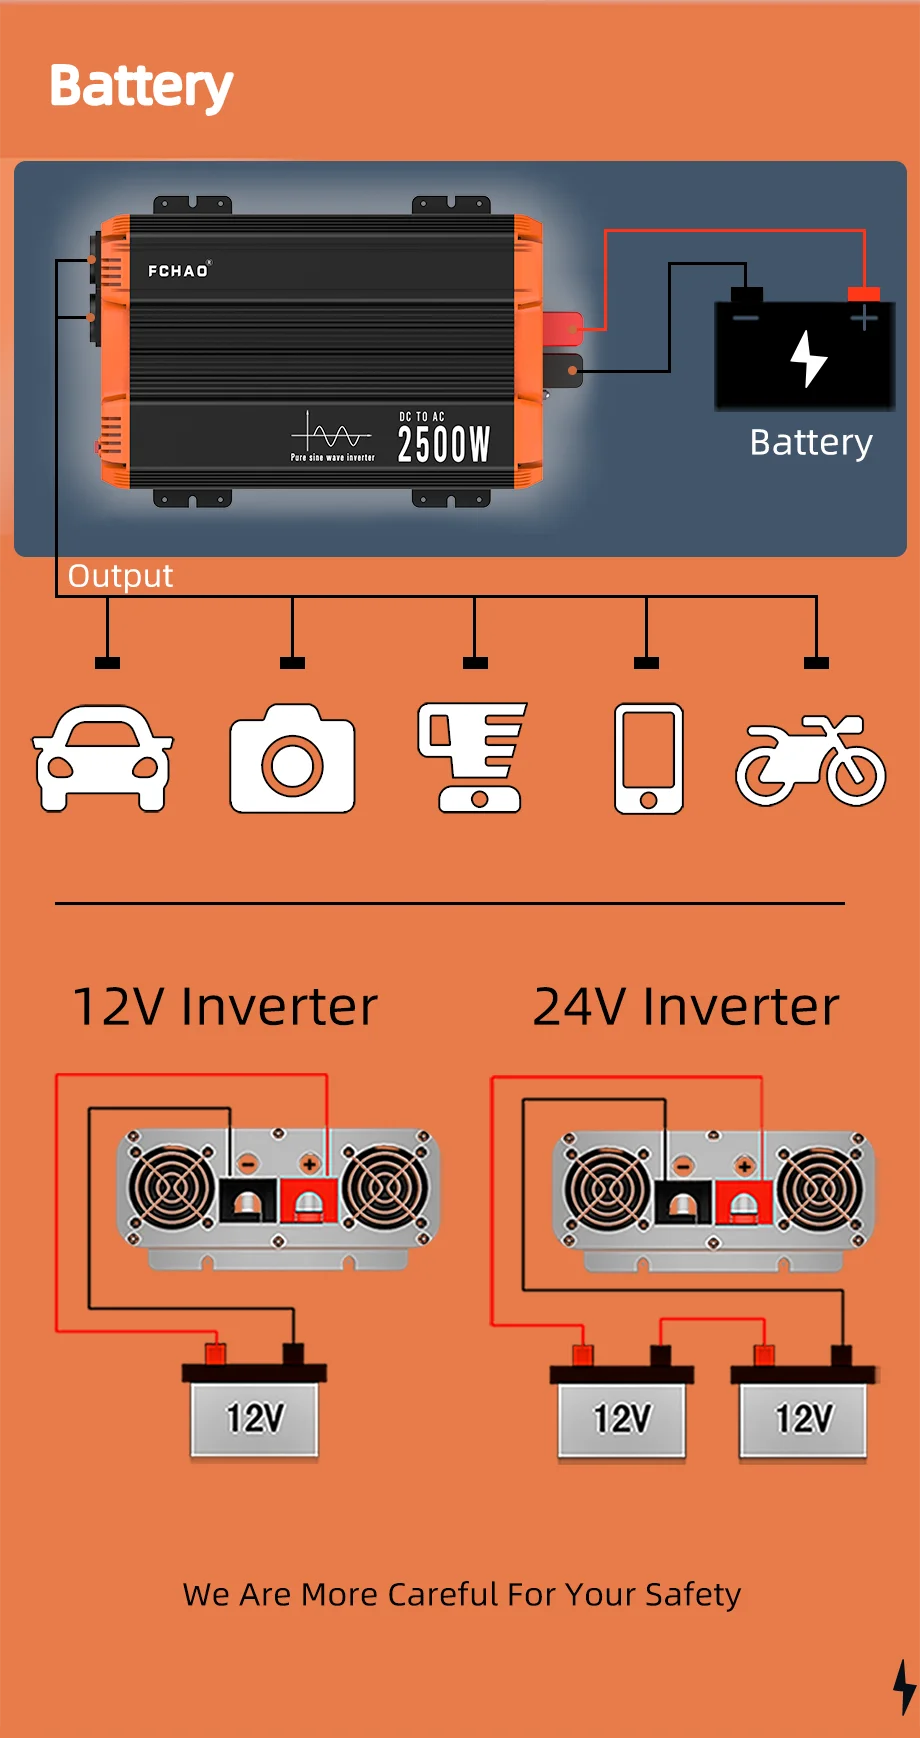 FCHAO 5000W Car Power Inverter, FCHAO Inverter converts DC power to pure sine wave AC power with LCD display and universal sockets.